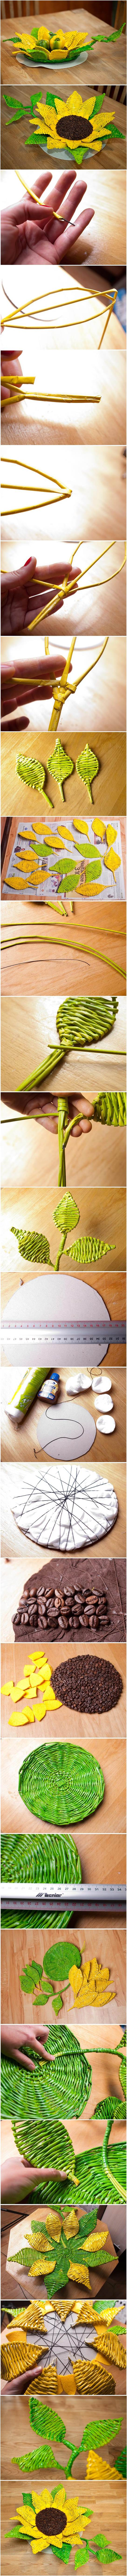 DIY Paper Woven Sunflower Tray